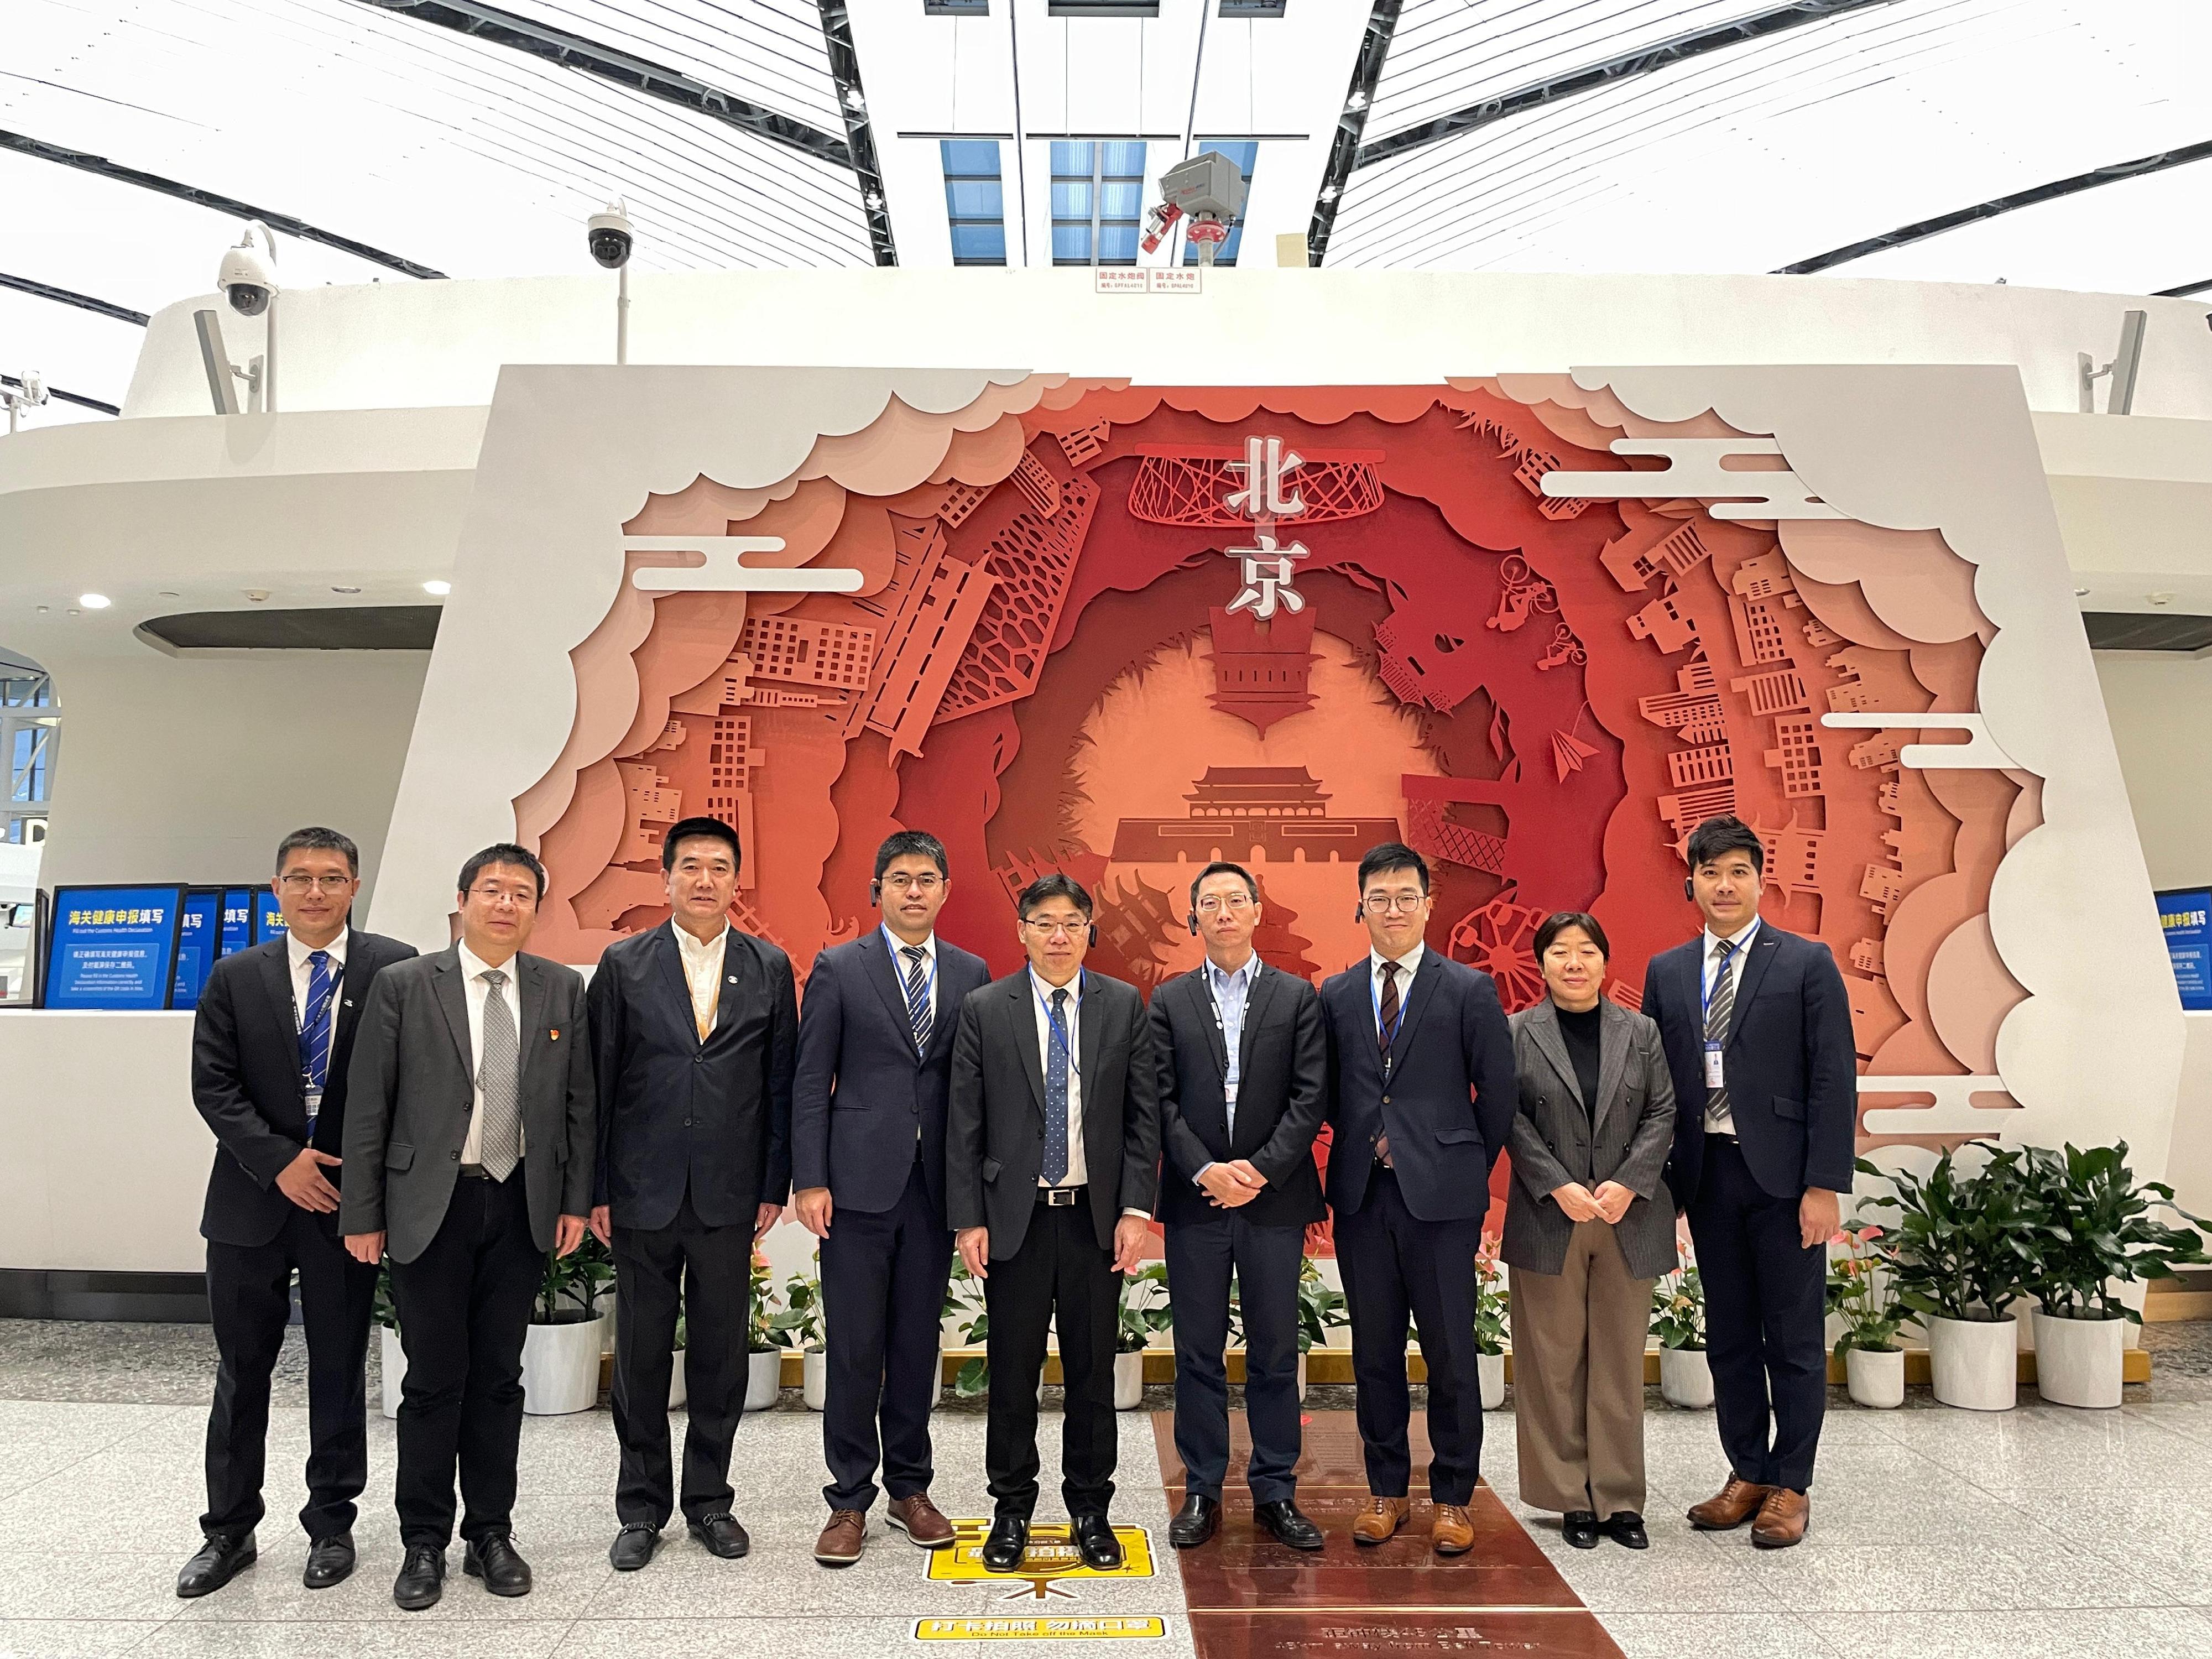 The Secretary for Transport and Logistics, Mr Lam Sai-hung, visited the terminal of Beijing Daxing International Airport yesterday (April 9). Photo shows Mr Lam (centre) with representatives of the Civil Aviation Administration of China and Daxing International Airport at the central axis of Beijing at the airport.